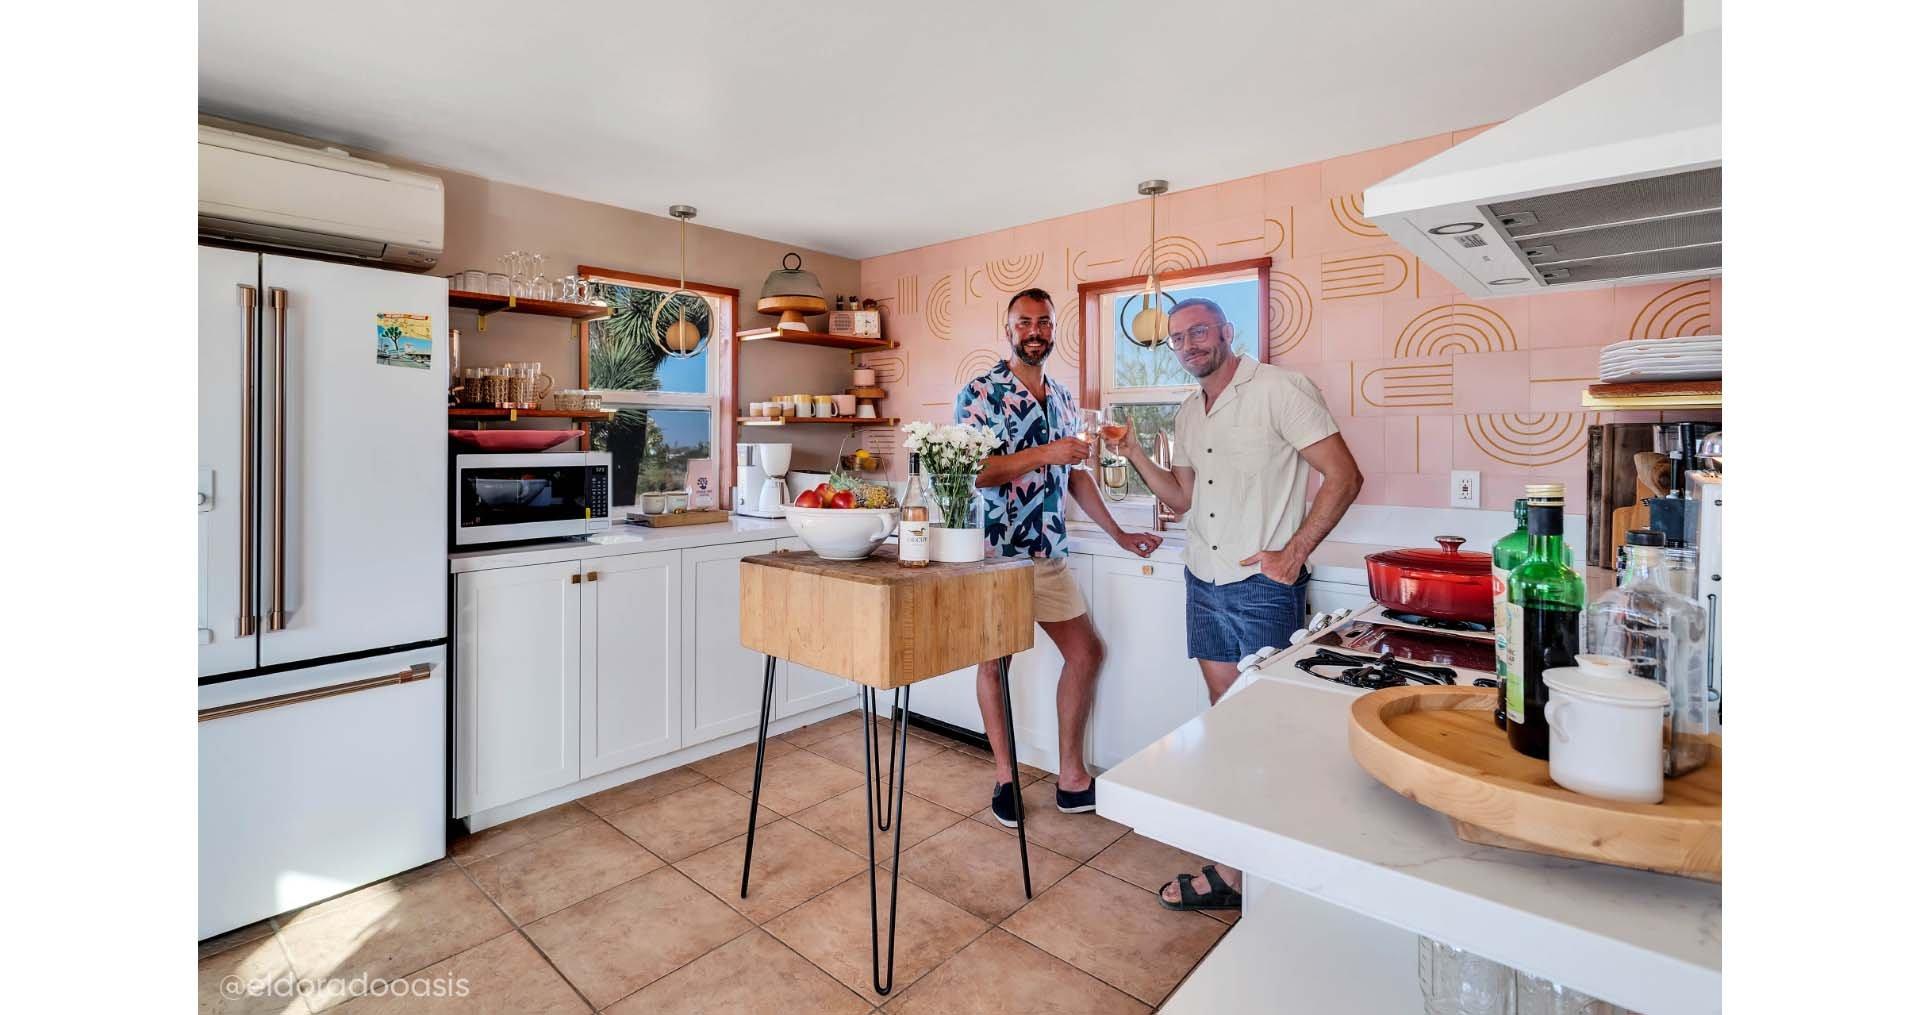 Kit Williamson and John Halbach of El Dorado Oasis standing in their kitchen featuring the Solid Bronze Textured Square Knob